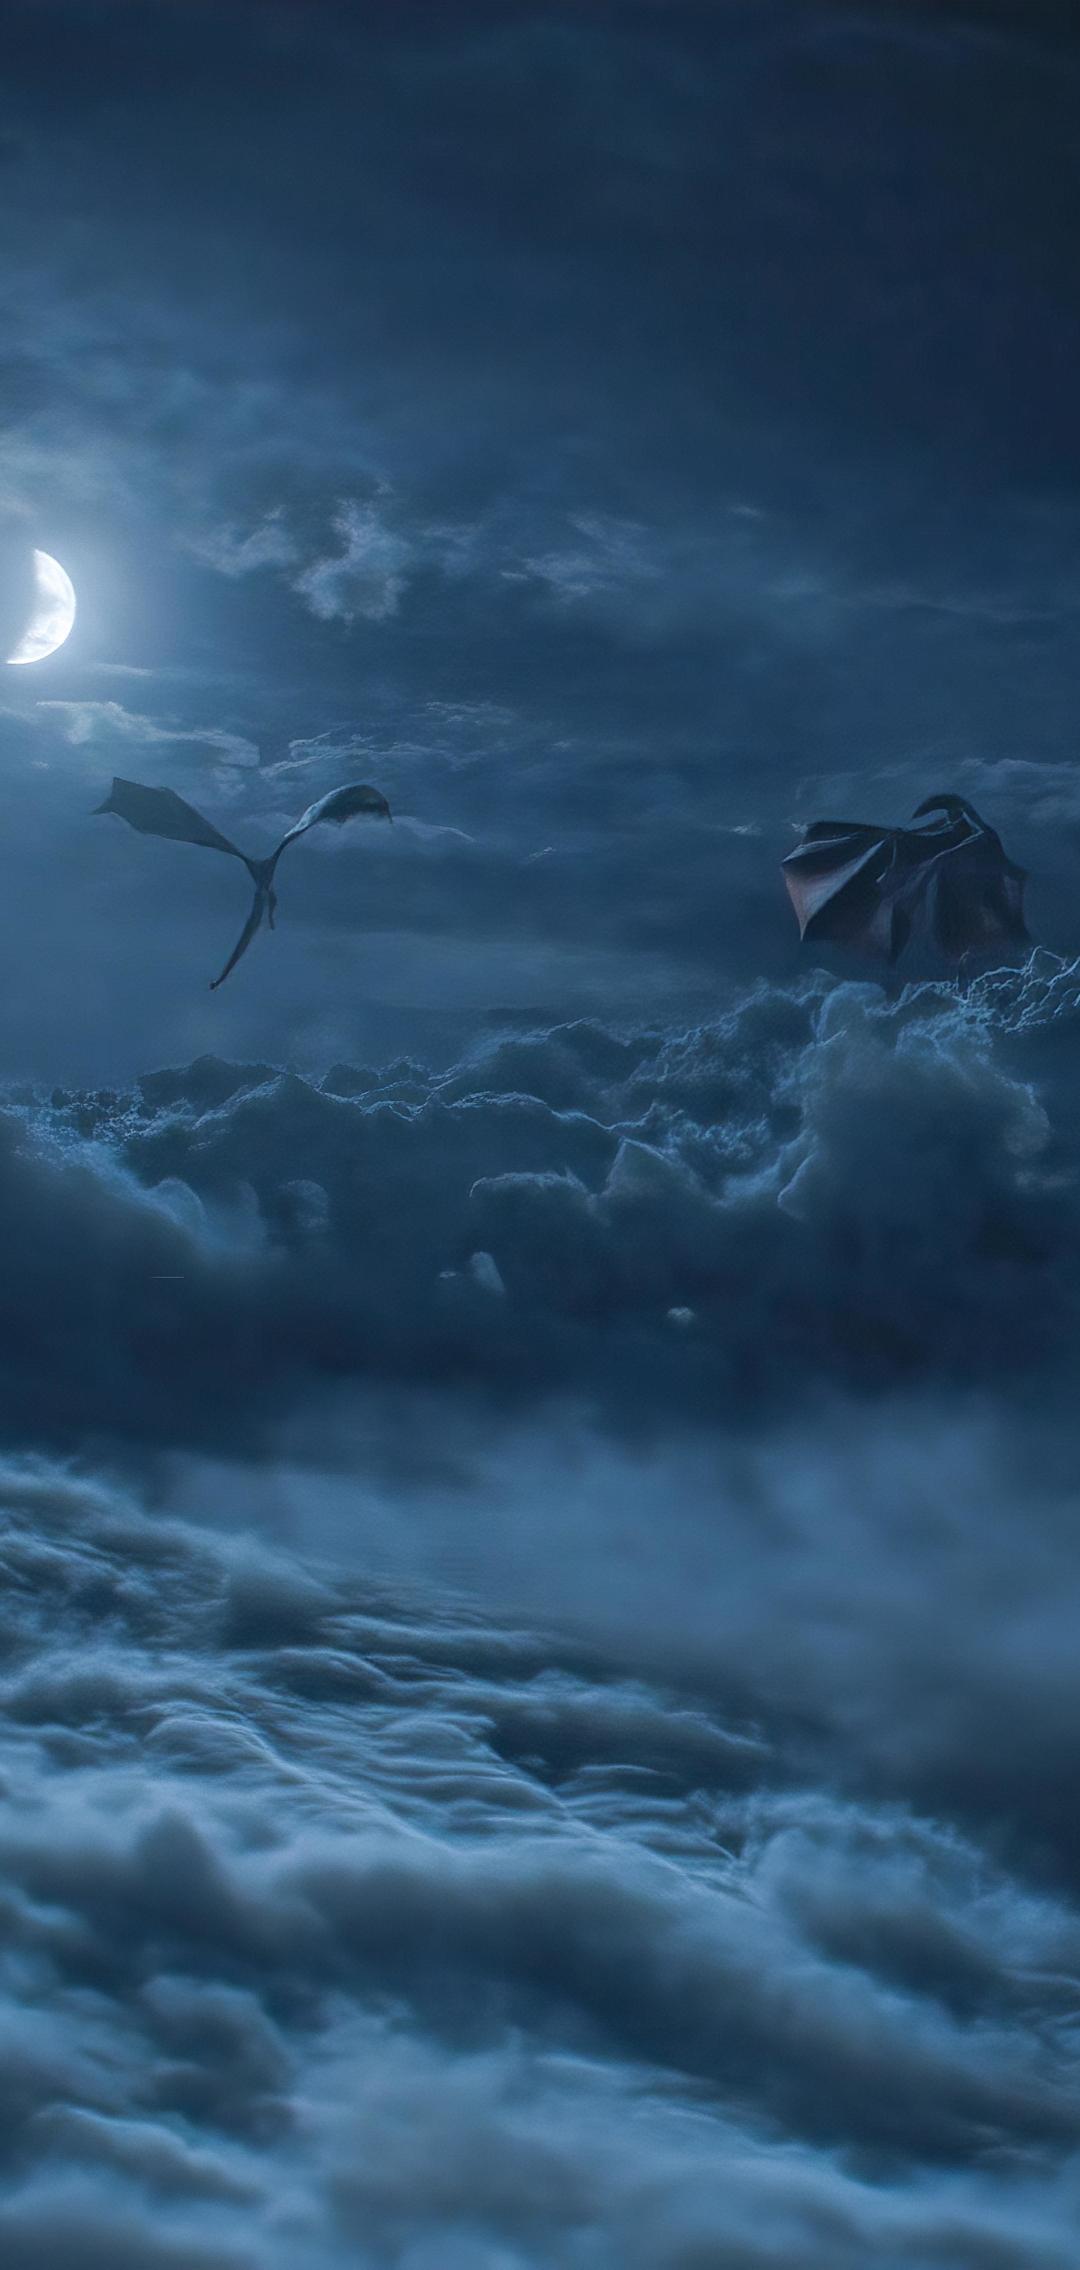 Dragons Above Cloud Game Of Throne Season 8 1080x2270